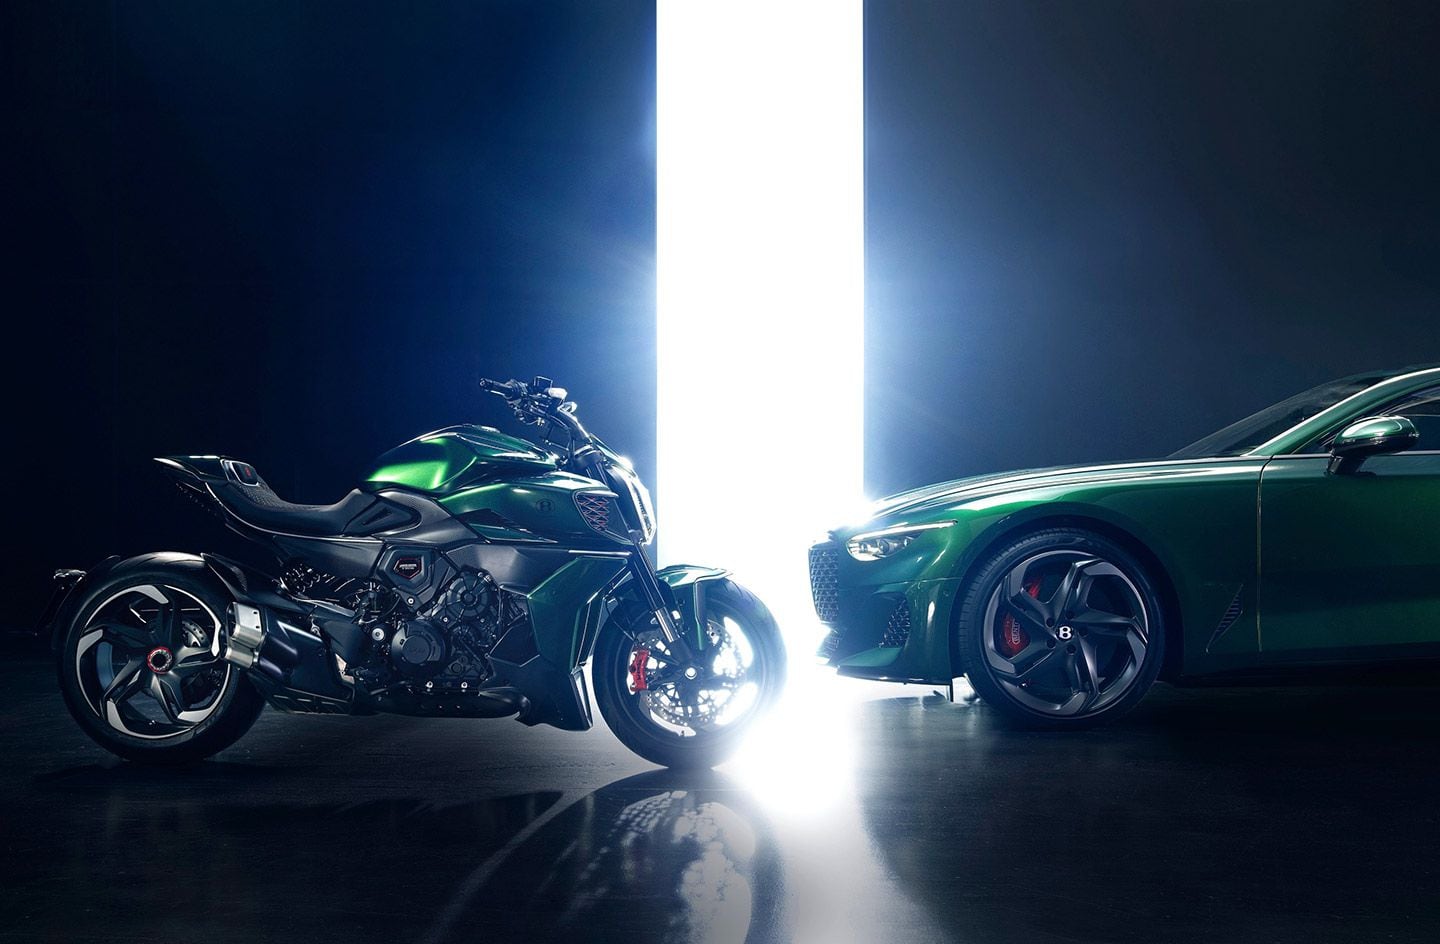 The car isn’t street legal in the US, so forget about adding that to the stable; the Diavel For Bentley, however, can be had for $70,000 and up.